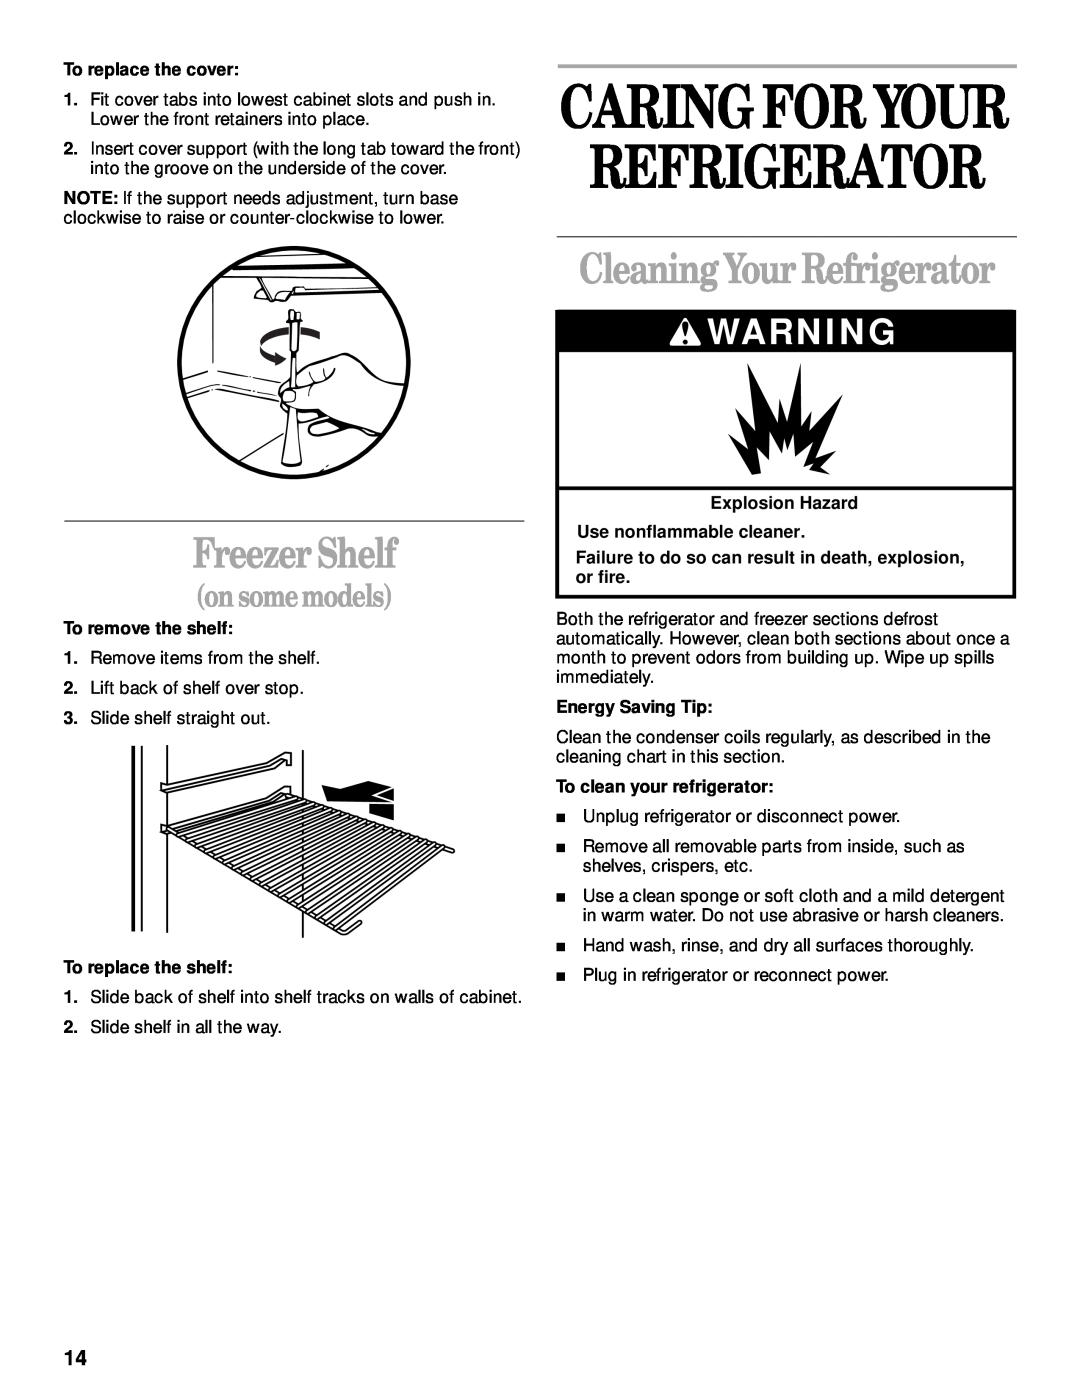 Whirlpool 3VET16GKGW01 manual Caring For Your Refrigerator, Freezer Shelf, CleaningYour Refrigerator, onsomemodels 